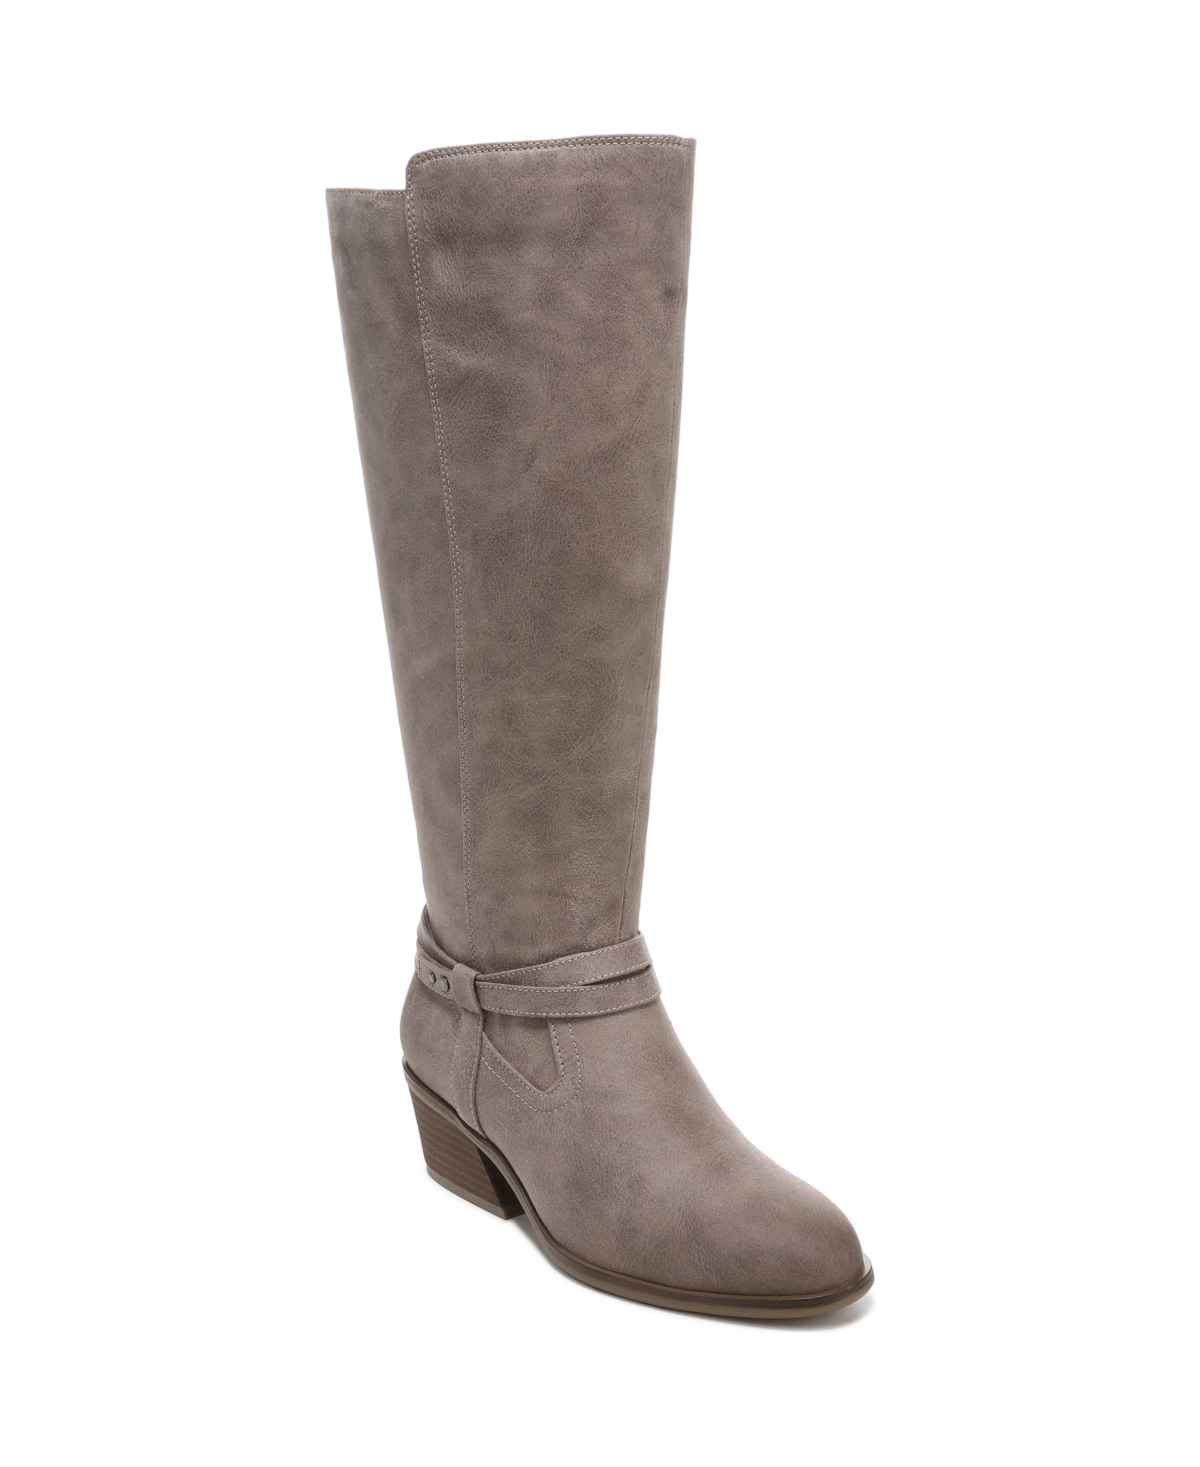 Women's Liberate Wide Calf High Shaft Boots - Taupe Fabric